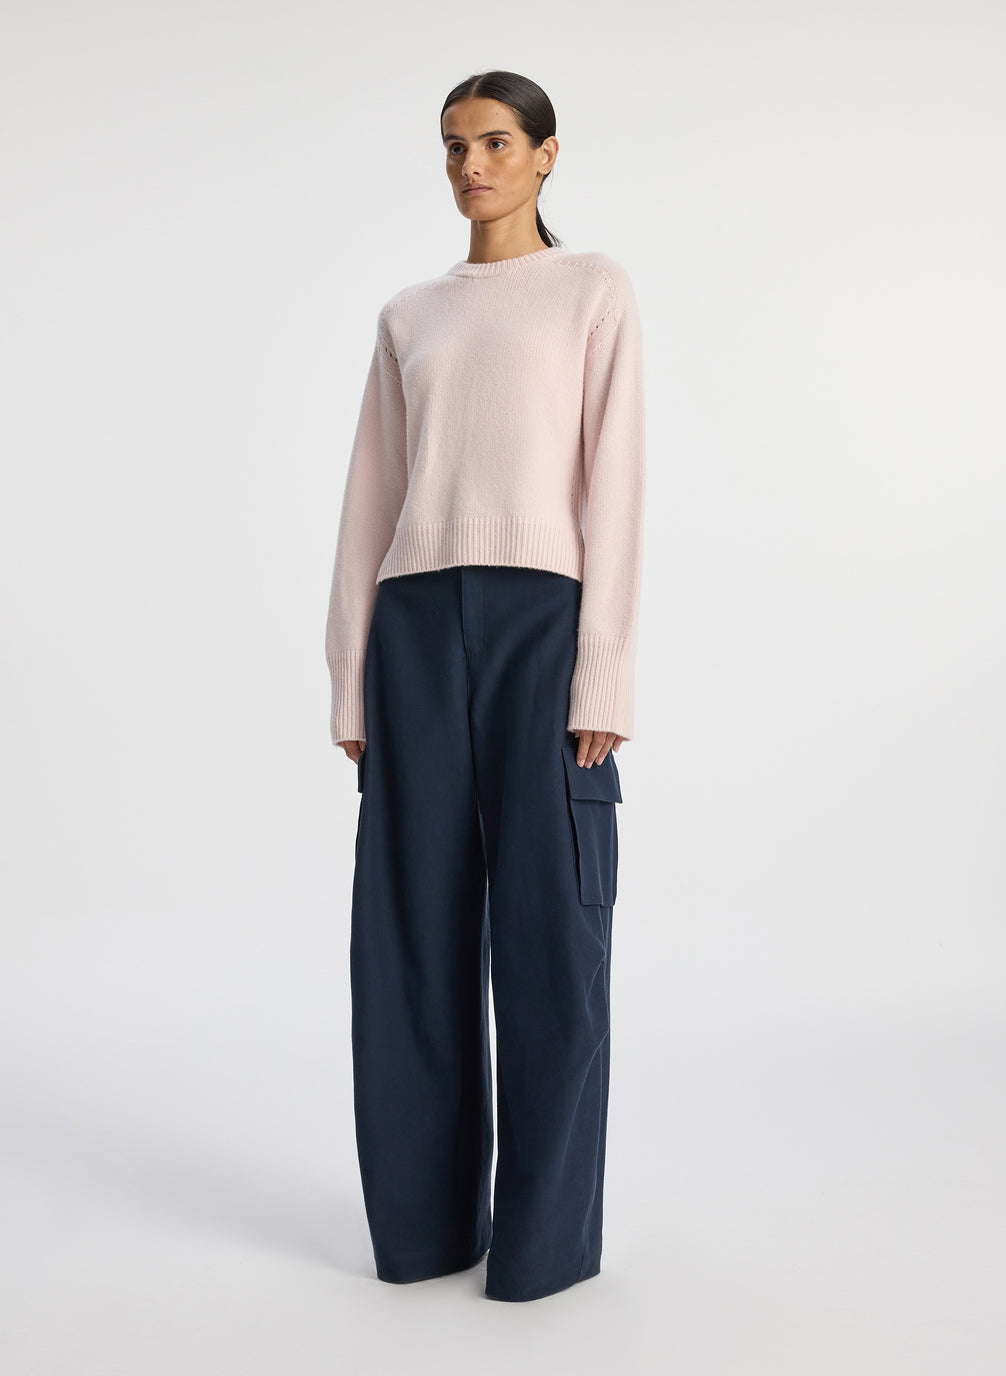 side view of woman wearing pink sweater and navy blue satin cargo pants